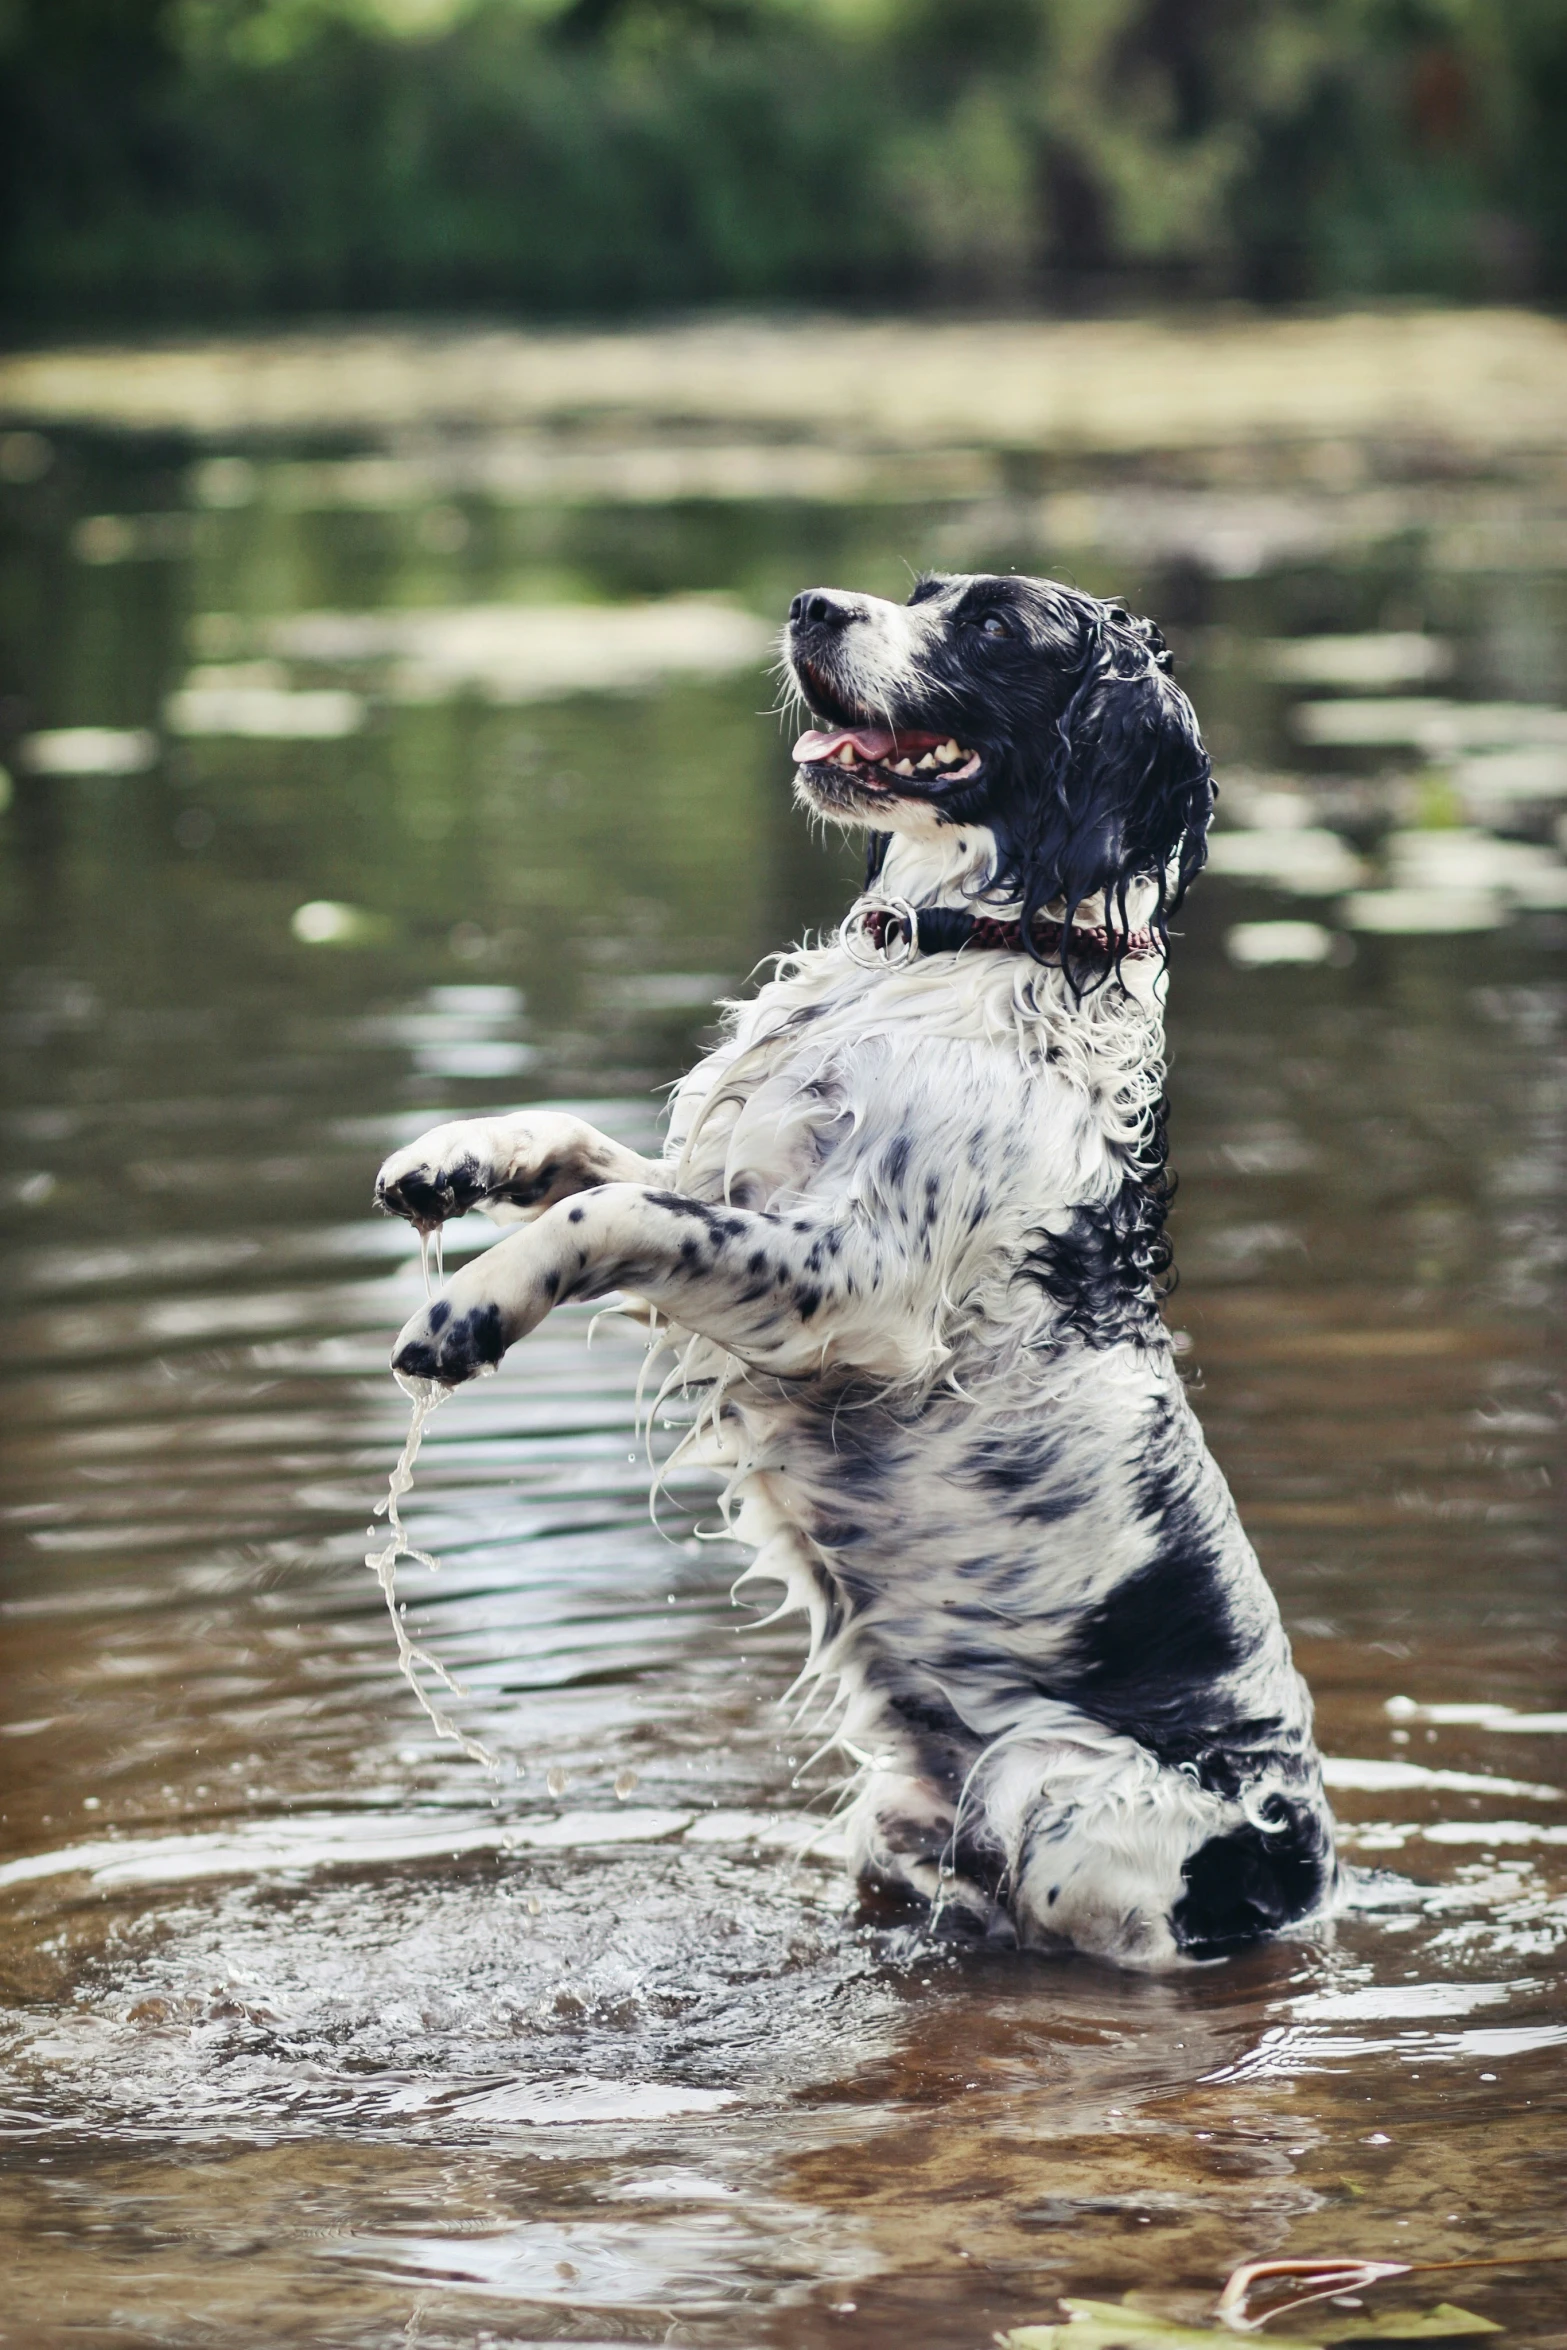 a black and white dog jumping into water